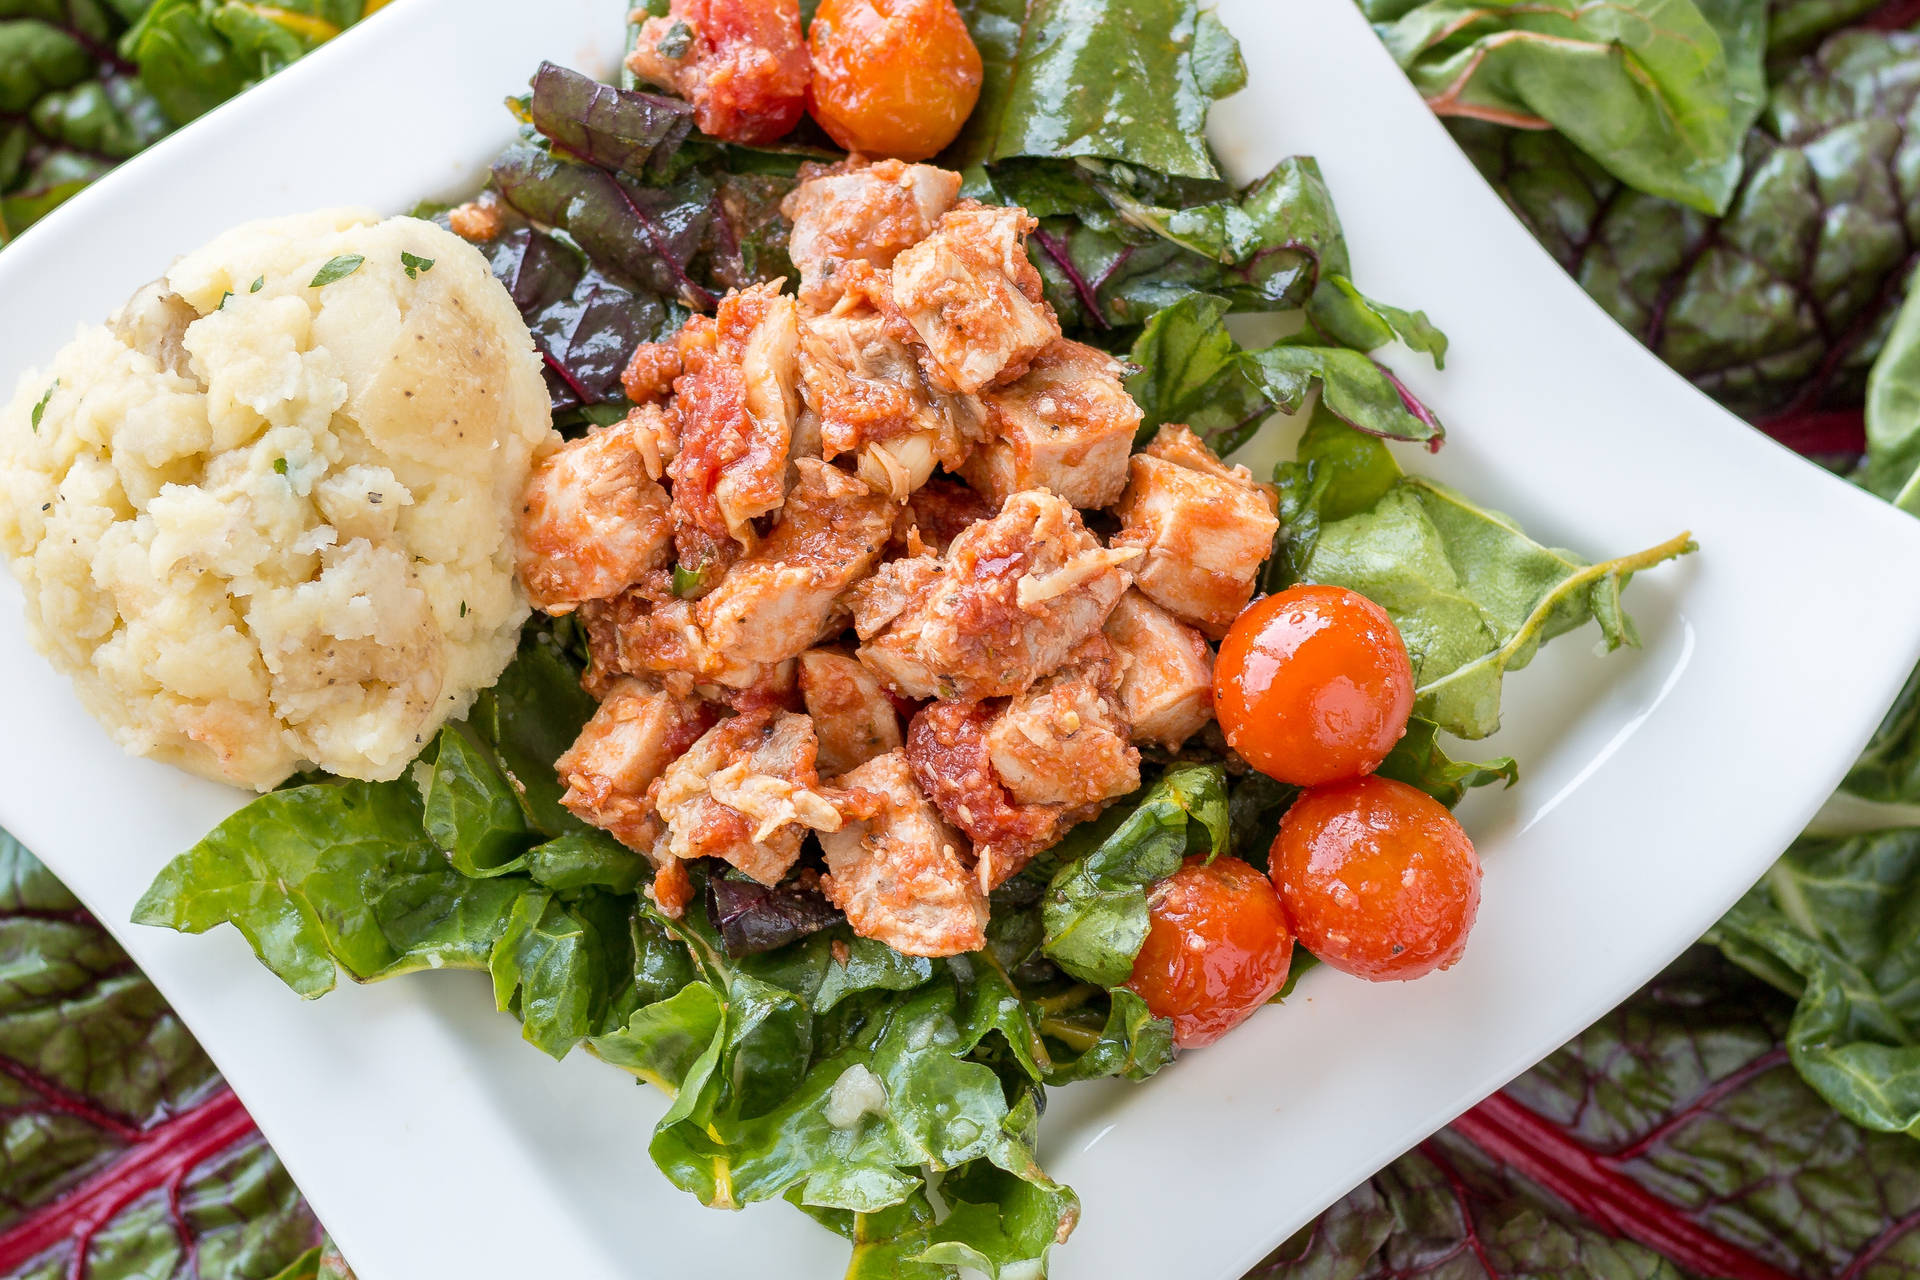 A Heart-healthy Meal: Chicken Salad With Mashed Potatoes